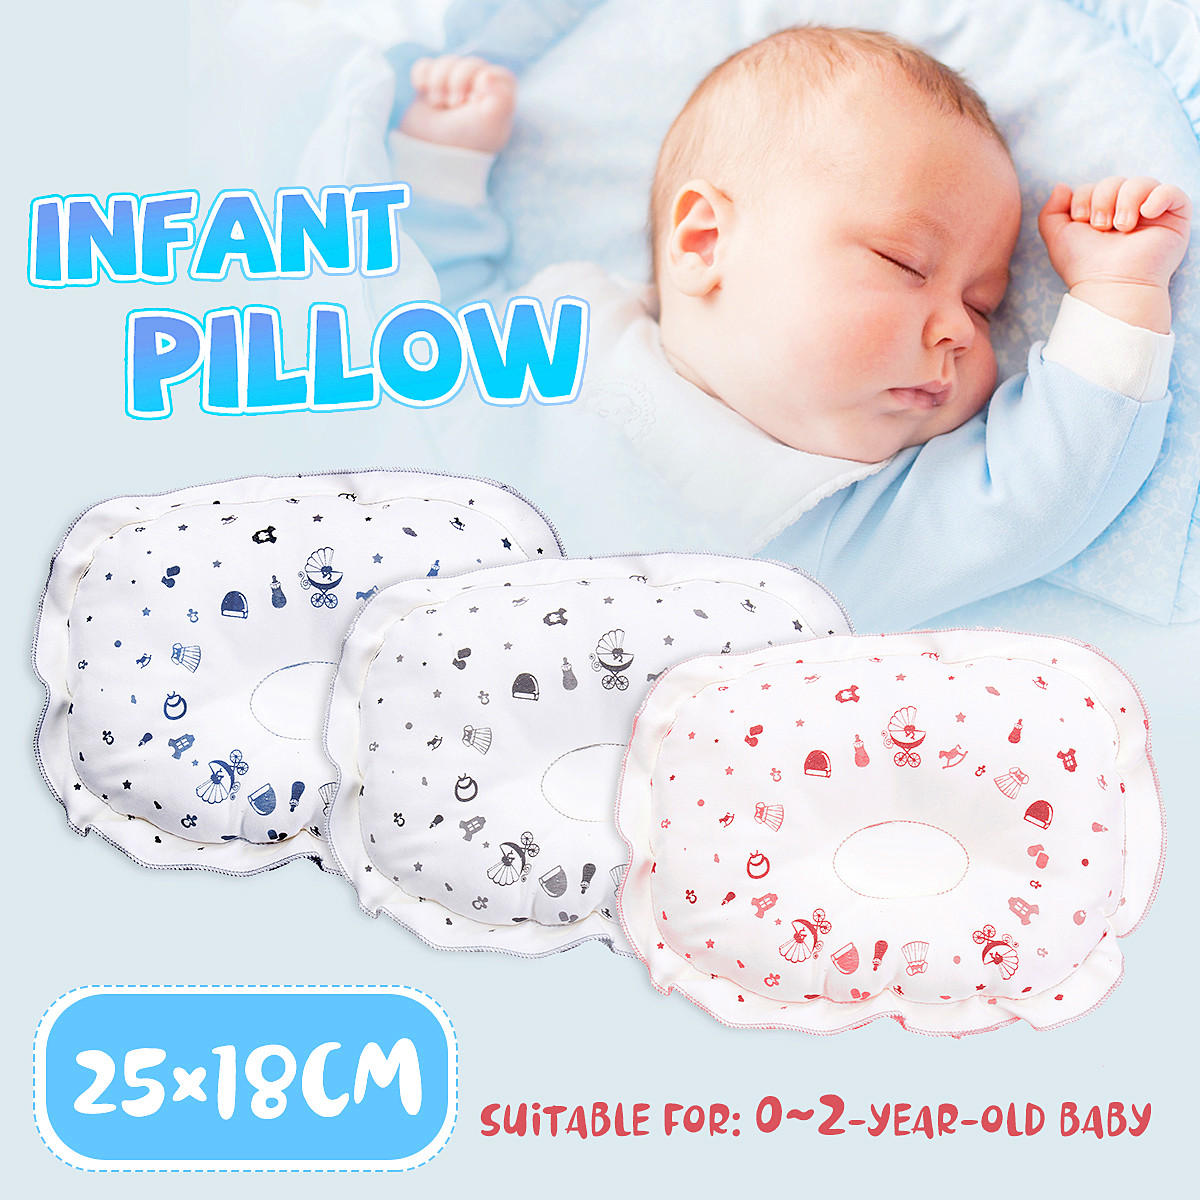 baby support pillow target